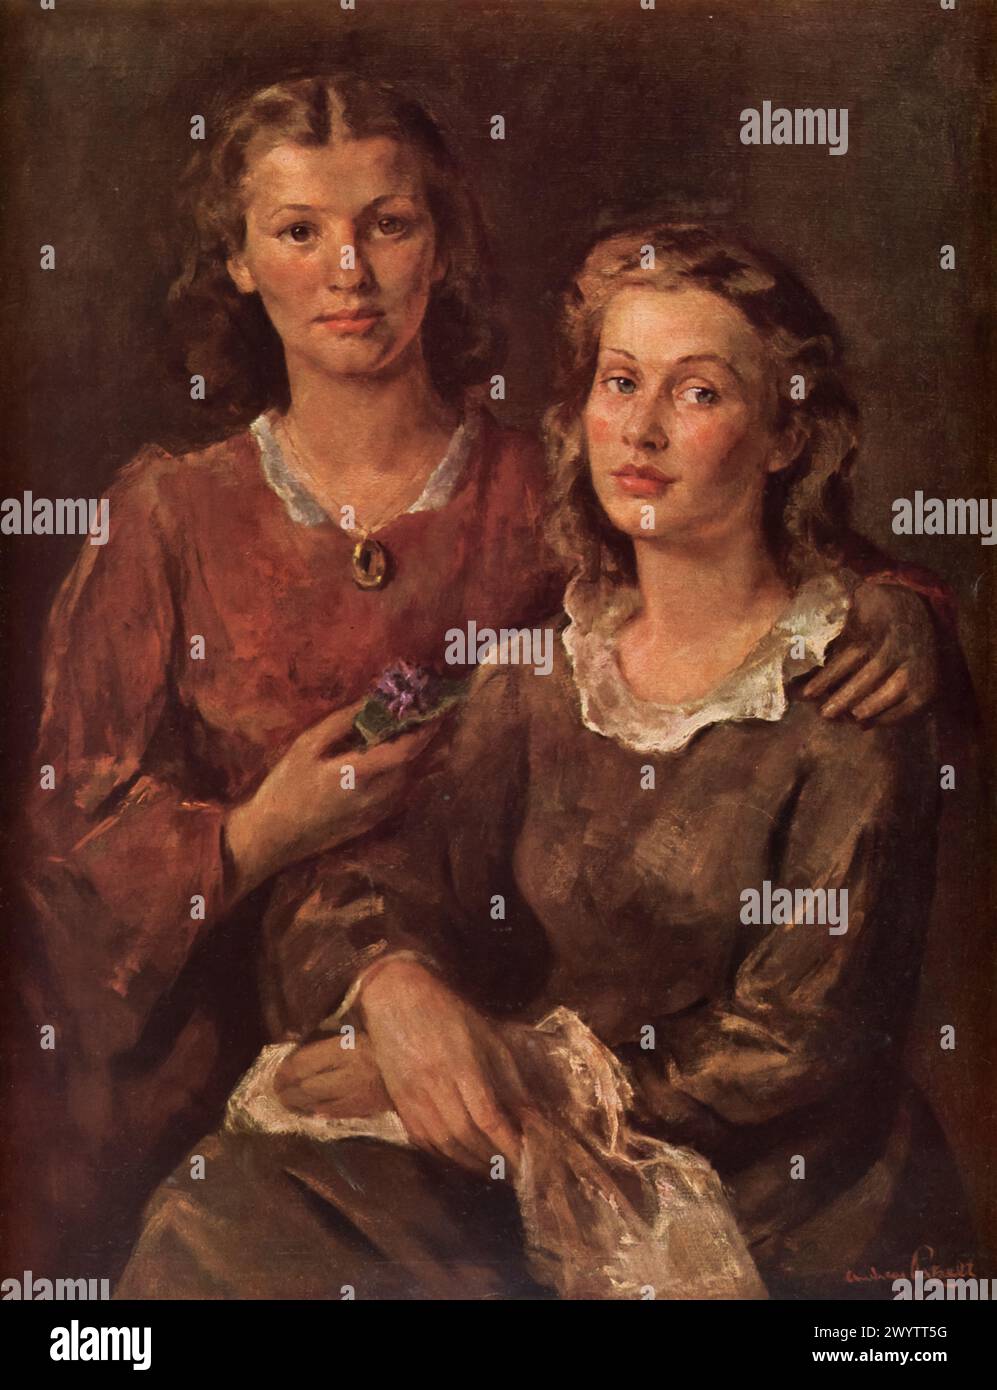 A portrait titled 'Sisters' by Andreas Patzelt, circa 1945. This artwork served as Nazi propaganda during the Second World War, depicting two females that embody the Nazi ideals of the Aryan race: beauty, youth, purity, and fertility. Stock Photo